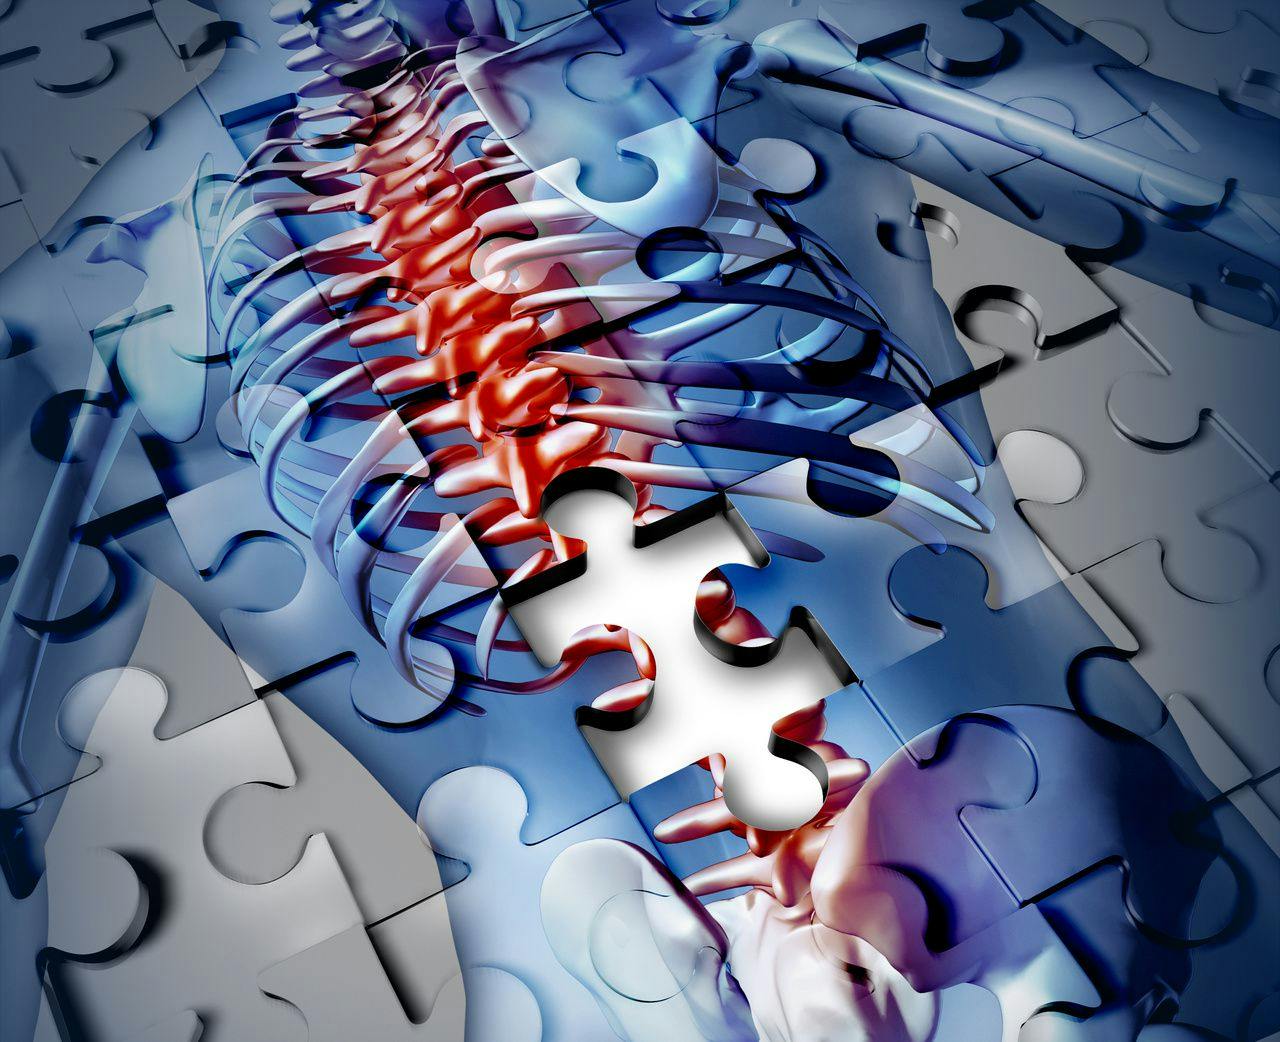 Puzzle-piece picture of spinal column